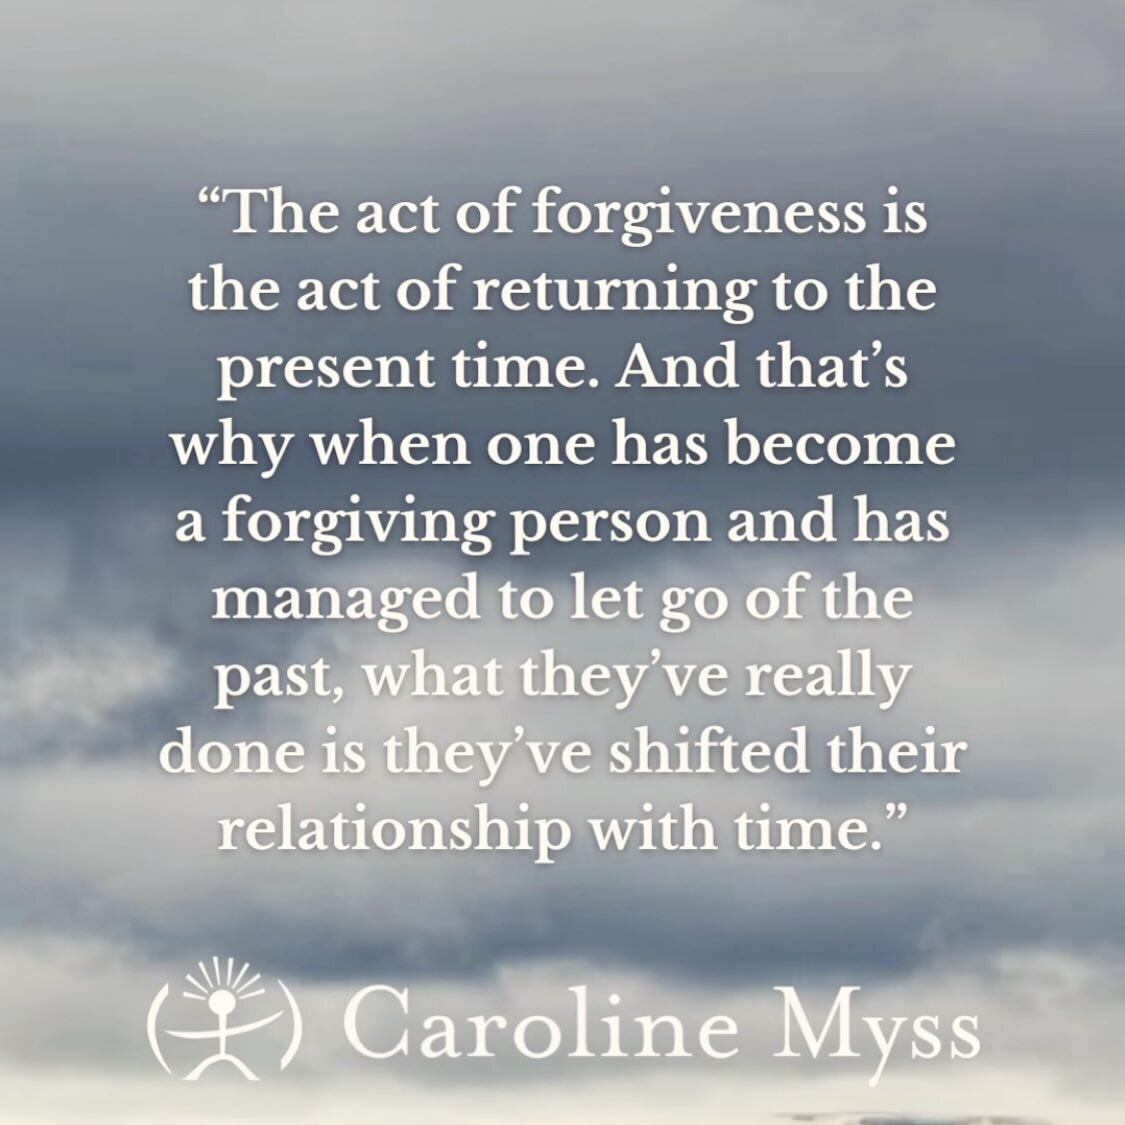 Forgiveness is so understated and underrated it&rsquo;s so so powerful in healing and reclaiming your sense of self, your power. 
If you can&rsquo;t forgive another, if you feel stuck &hellip; 
Forgive your self that is your power. In doing so, you a